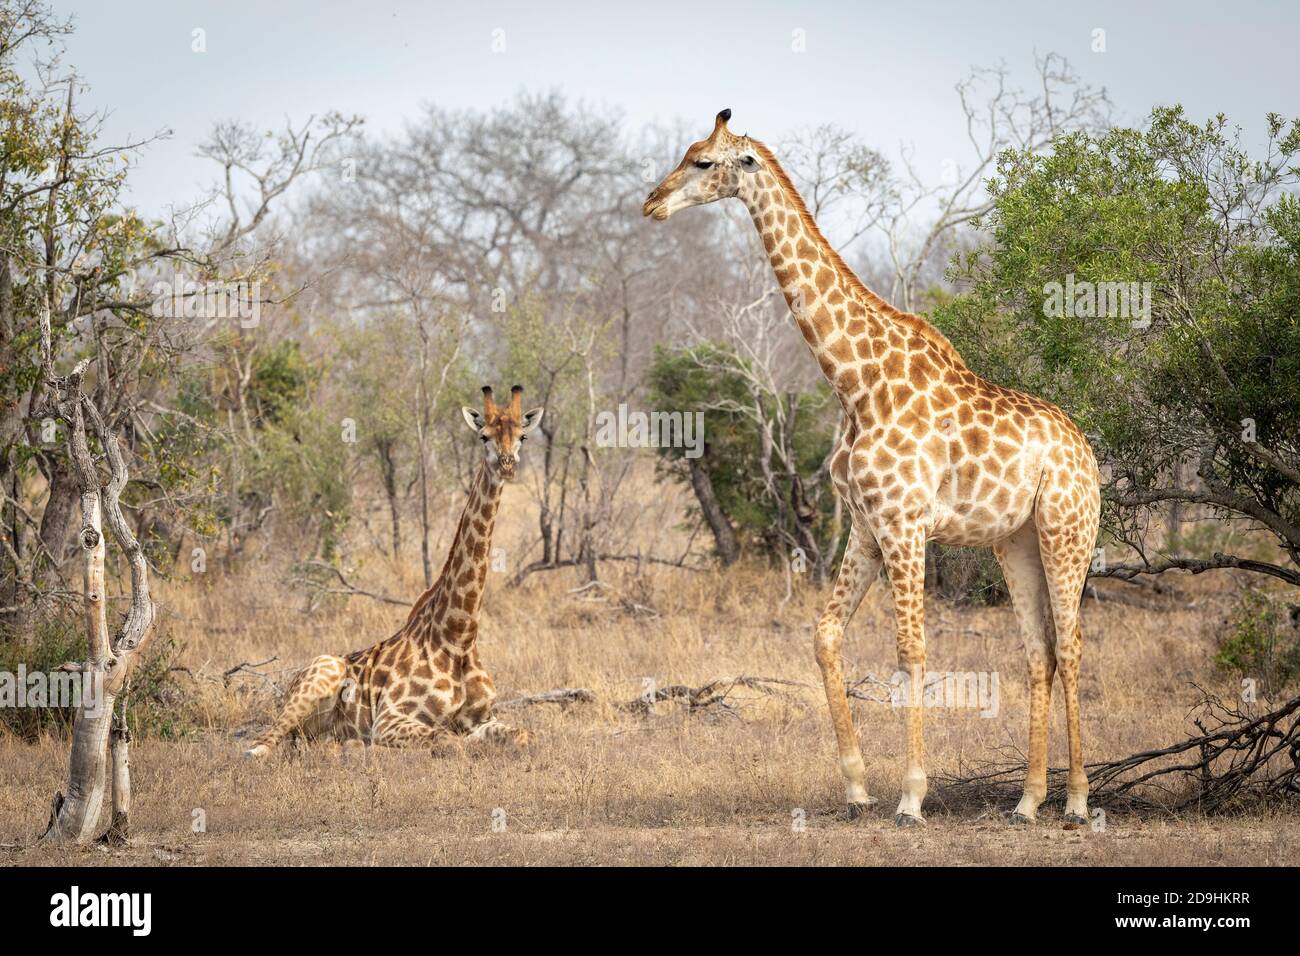 Female giraffe standing and another giraffe sitting in dry bush in Kruger Park in South Africa Stock Photo